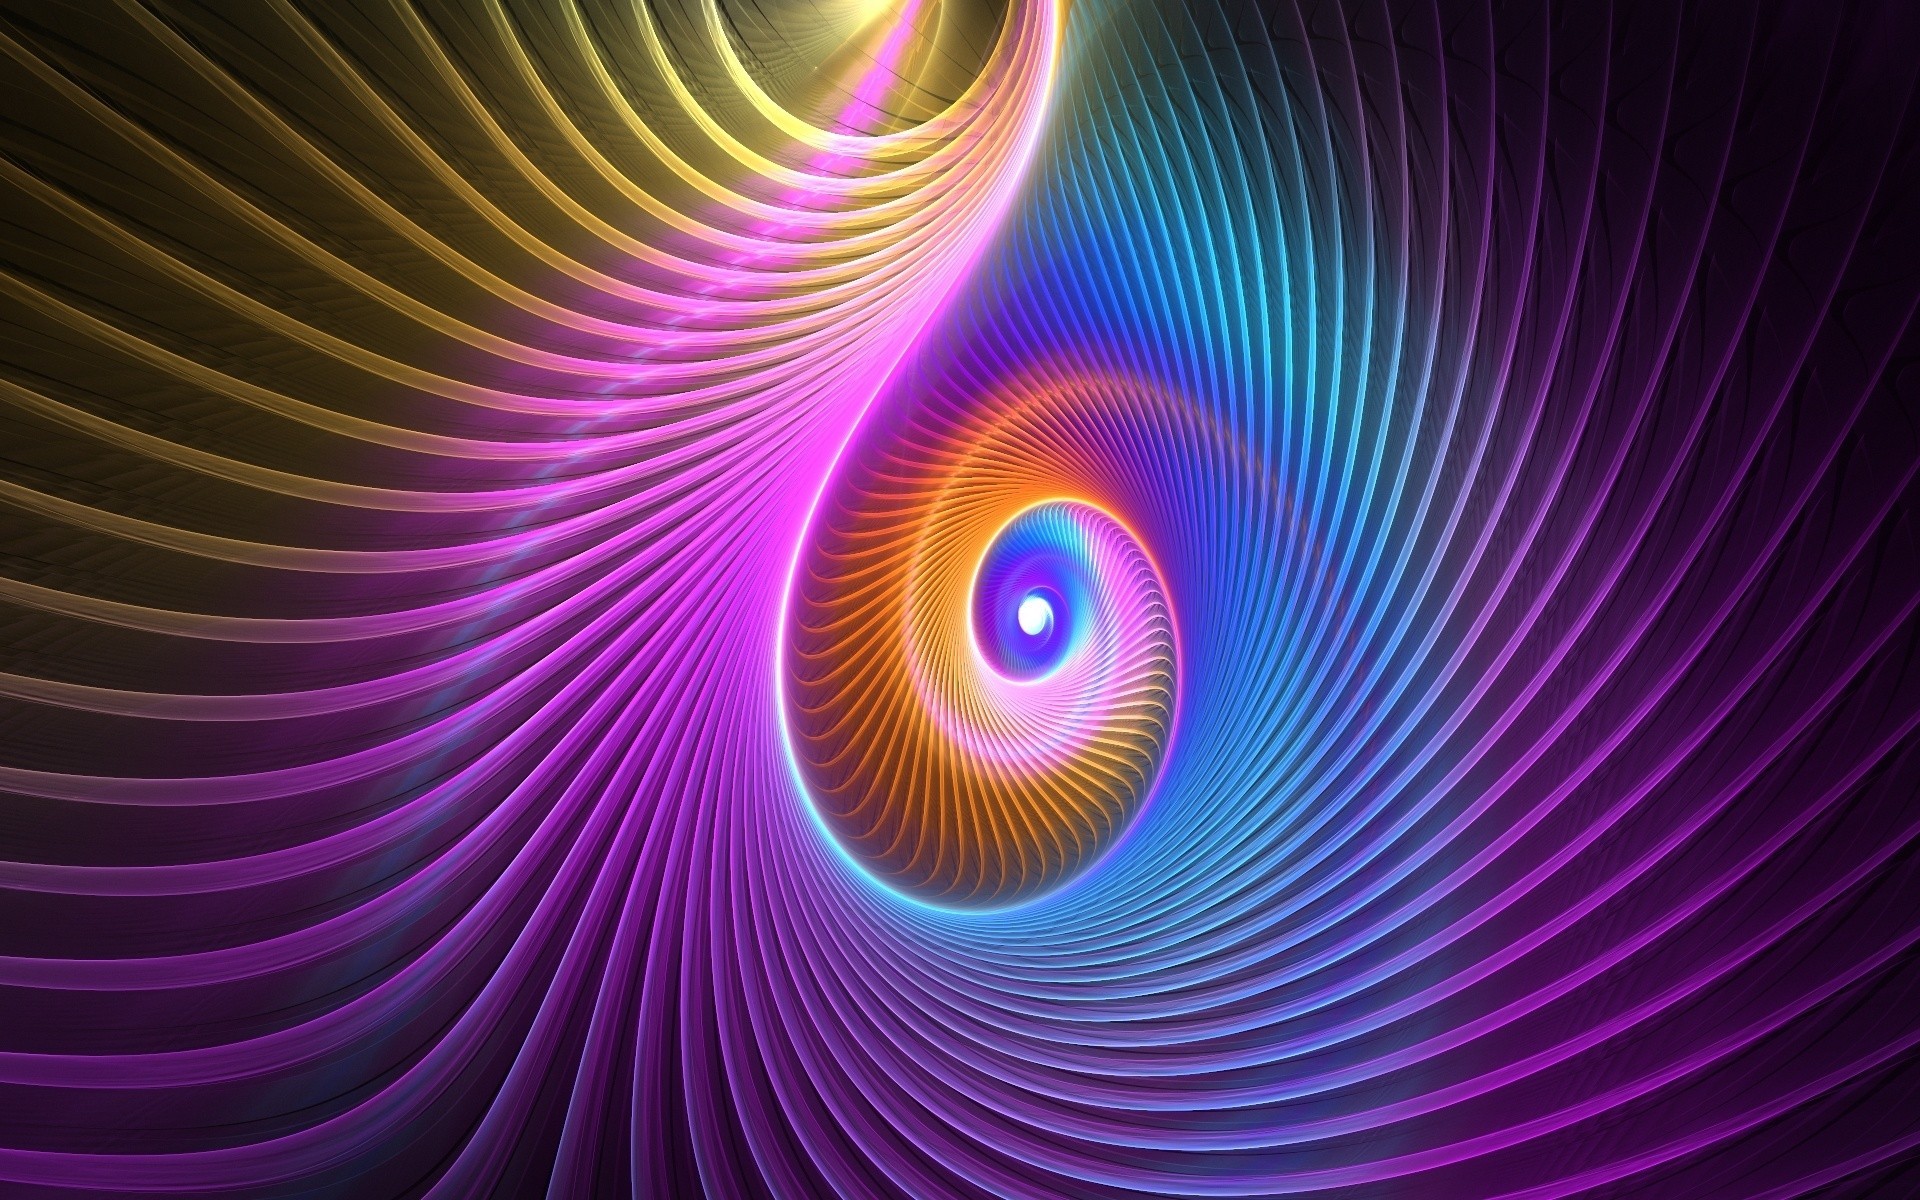 Free Hd Neon Abstract Wallpaper - 3d Background Images Hd - HD Wallpaper 